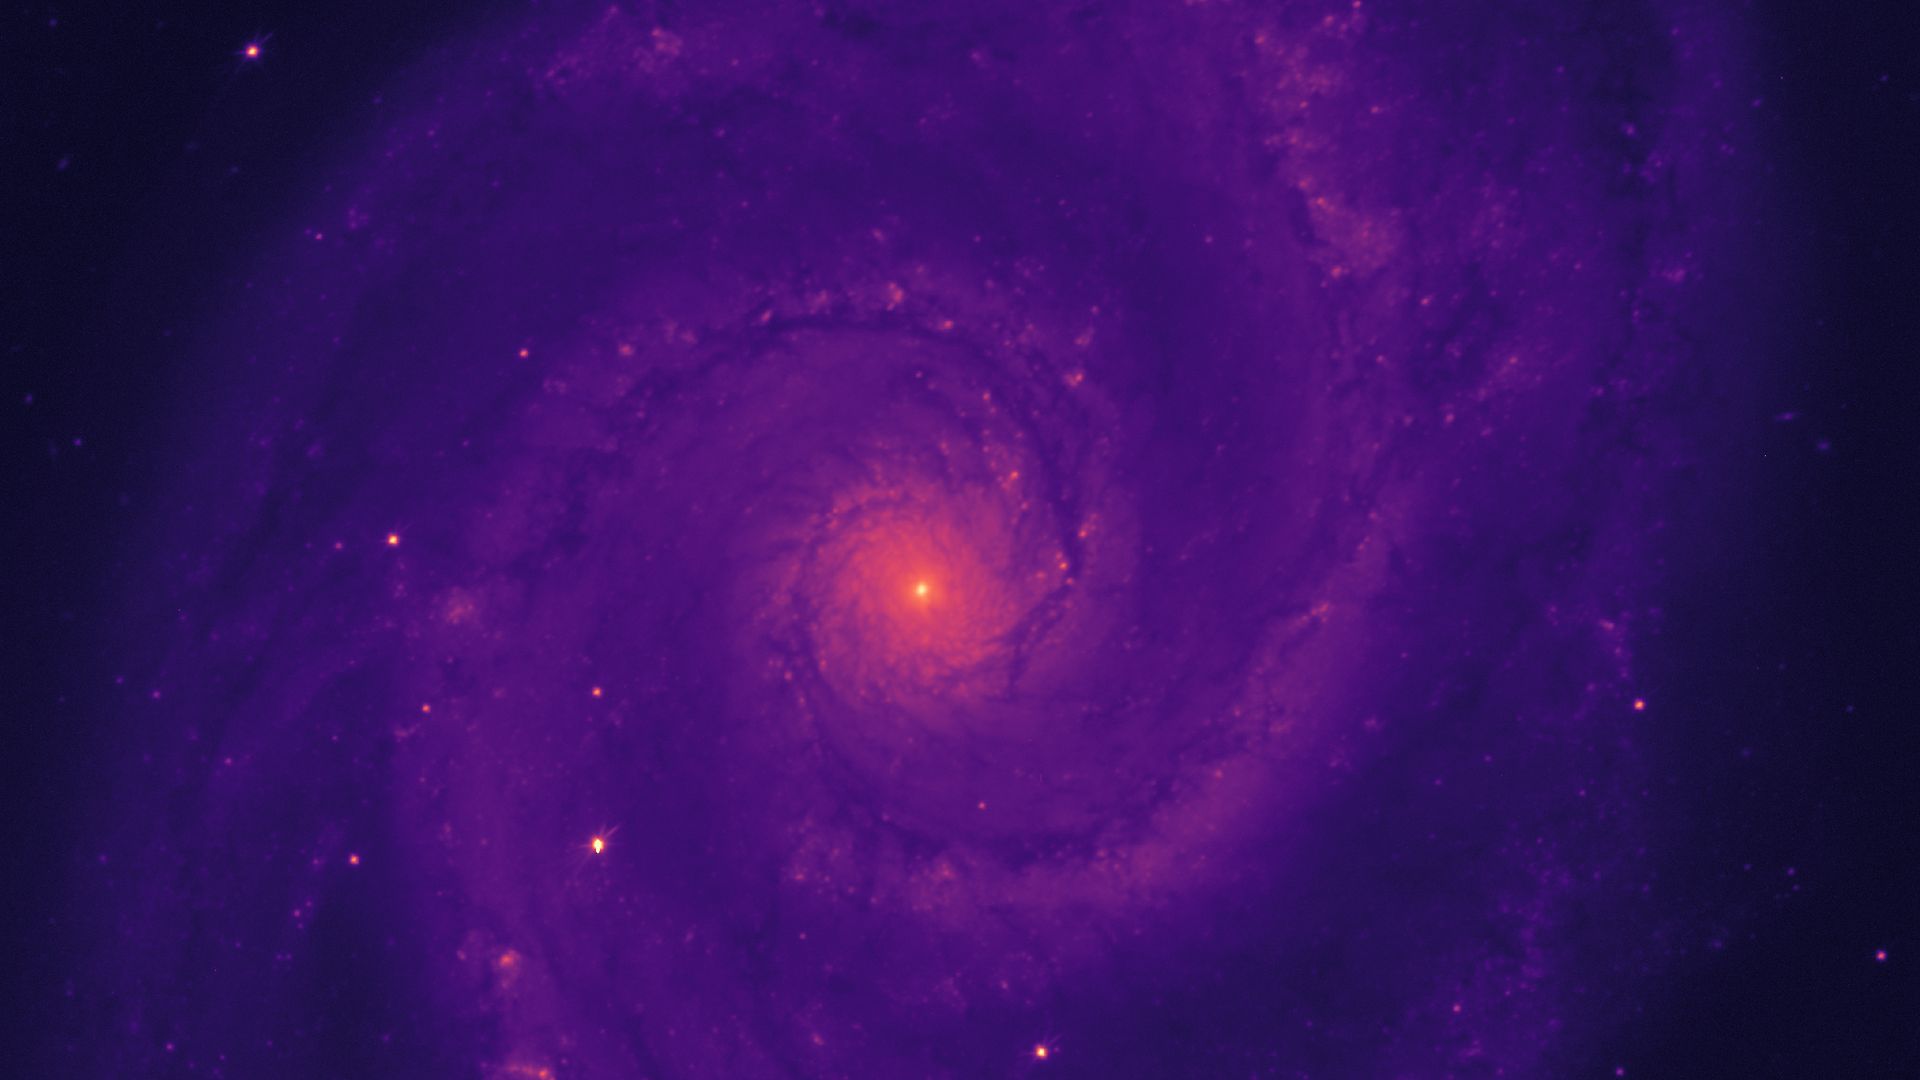 This is an image of the whirpool galaxy, which looks purple here with a bright orange and yellow center. 